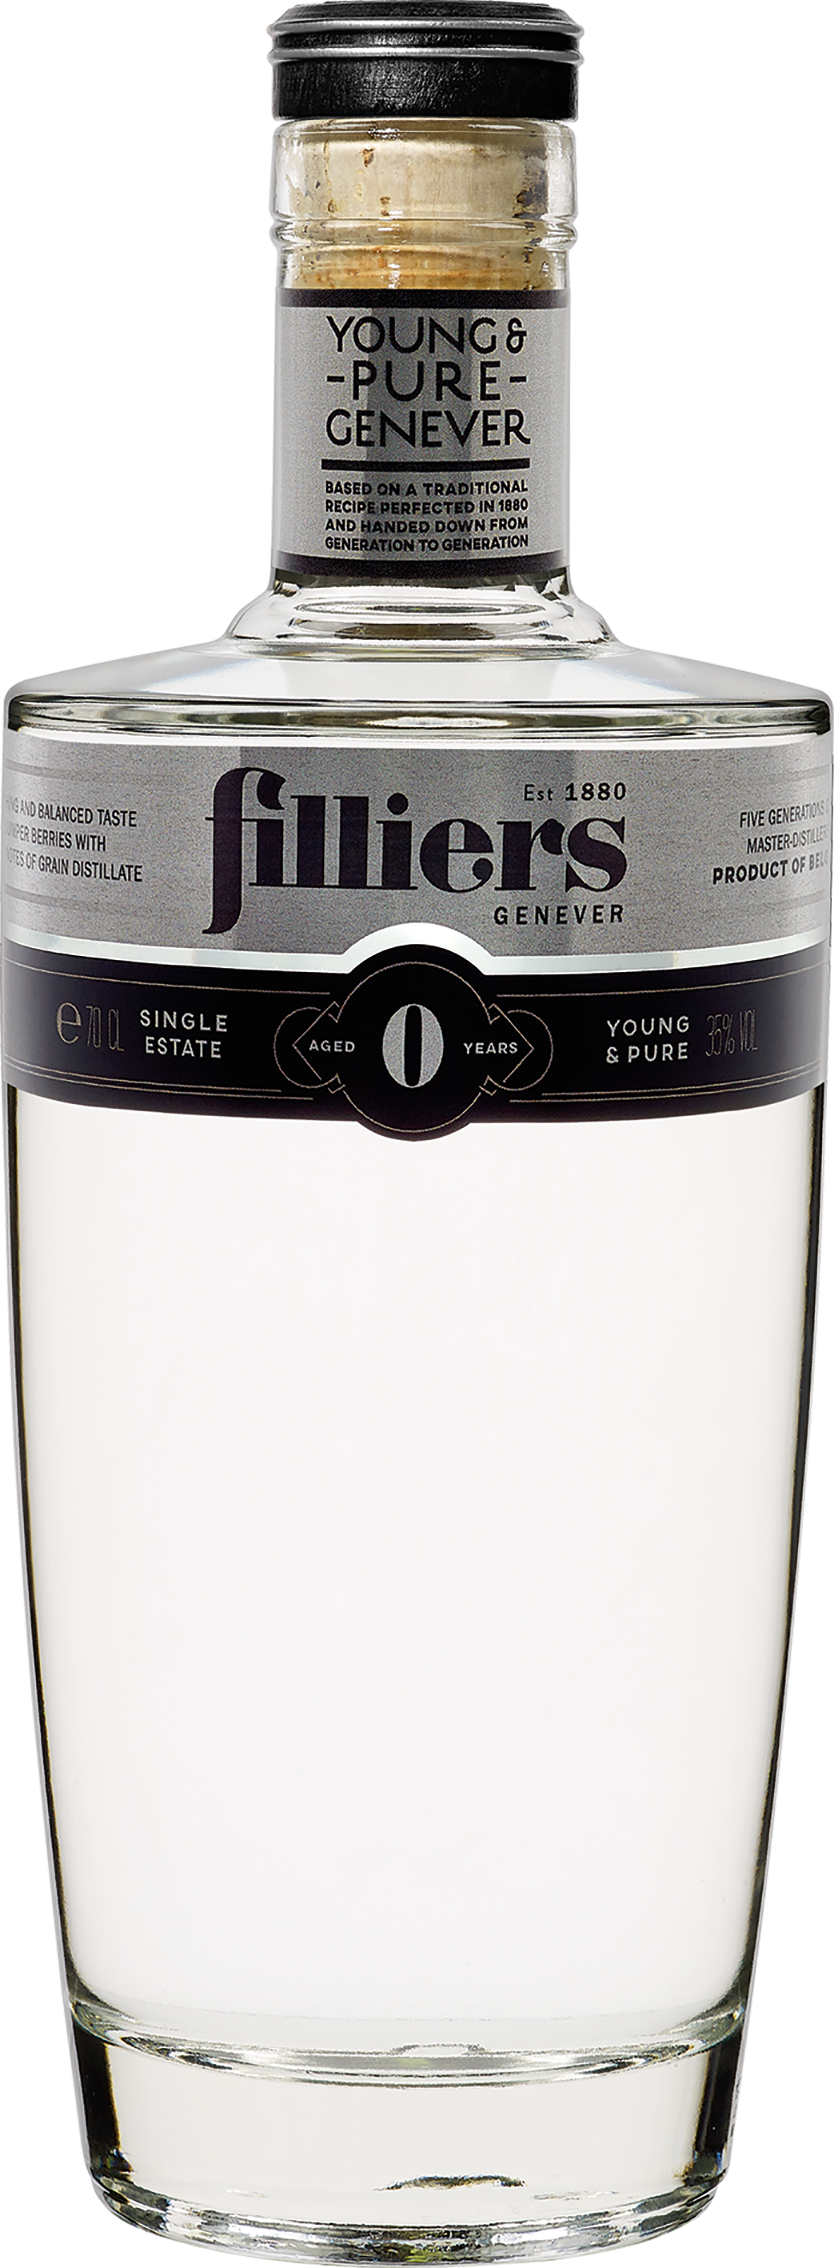 Filliers Genever "Young & Pure"